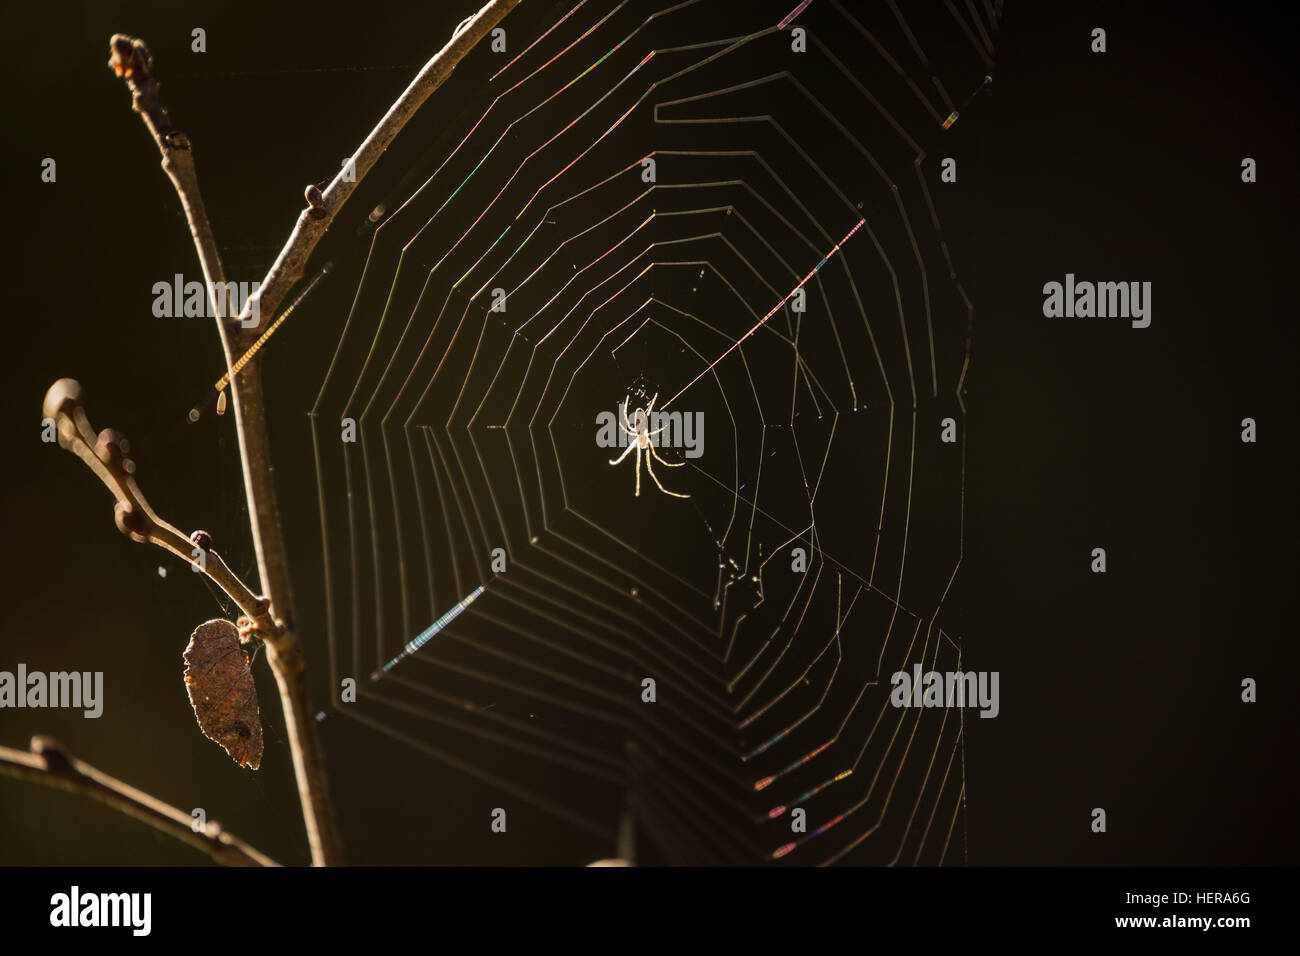 animal,art,black,bug,cobweb,connection,design,element,horror,insect,isolated,line,macro,nature,net,network,pattern,scary,silhouette,spider,spiderweb,symbol,texture,thread,trap,vector,web,white Stock Photo